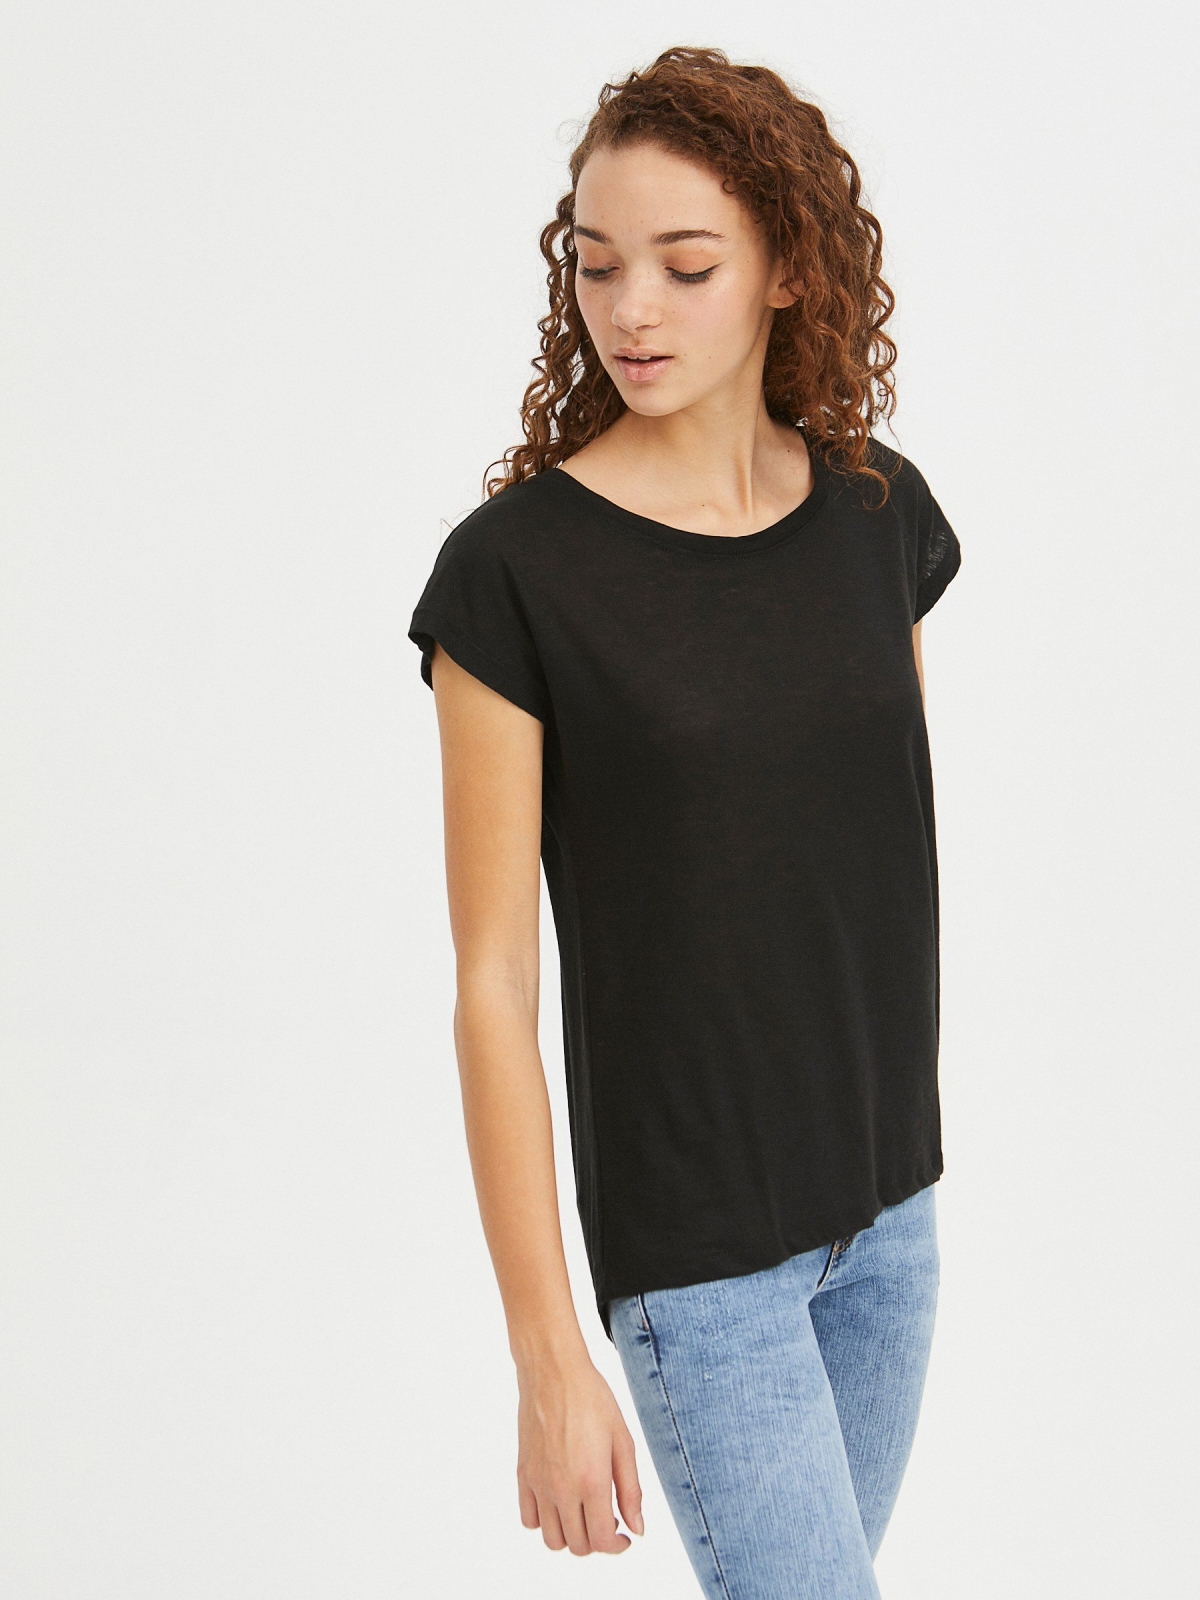 Button back t-shirt black middle front view